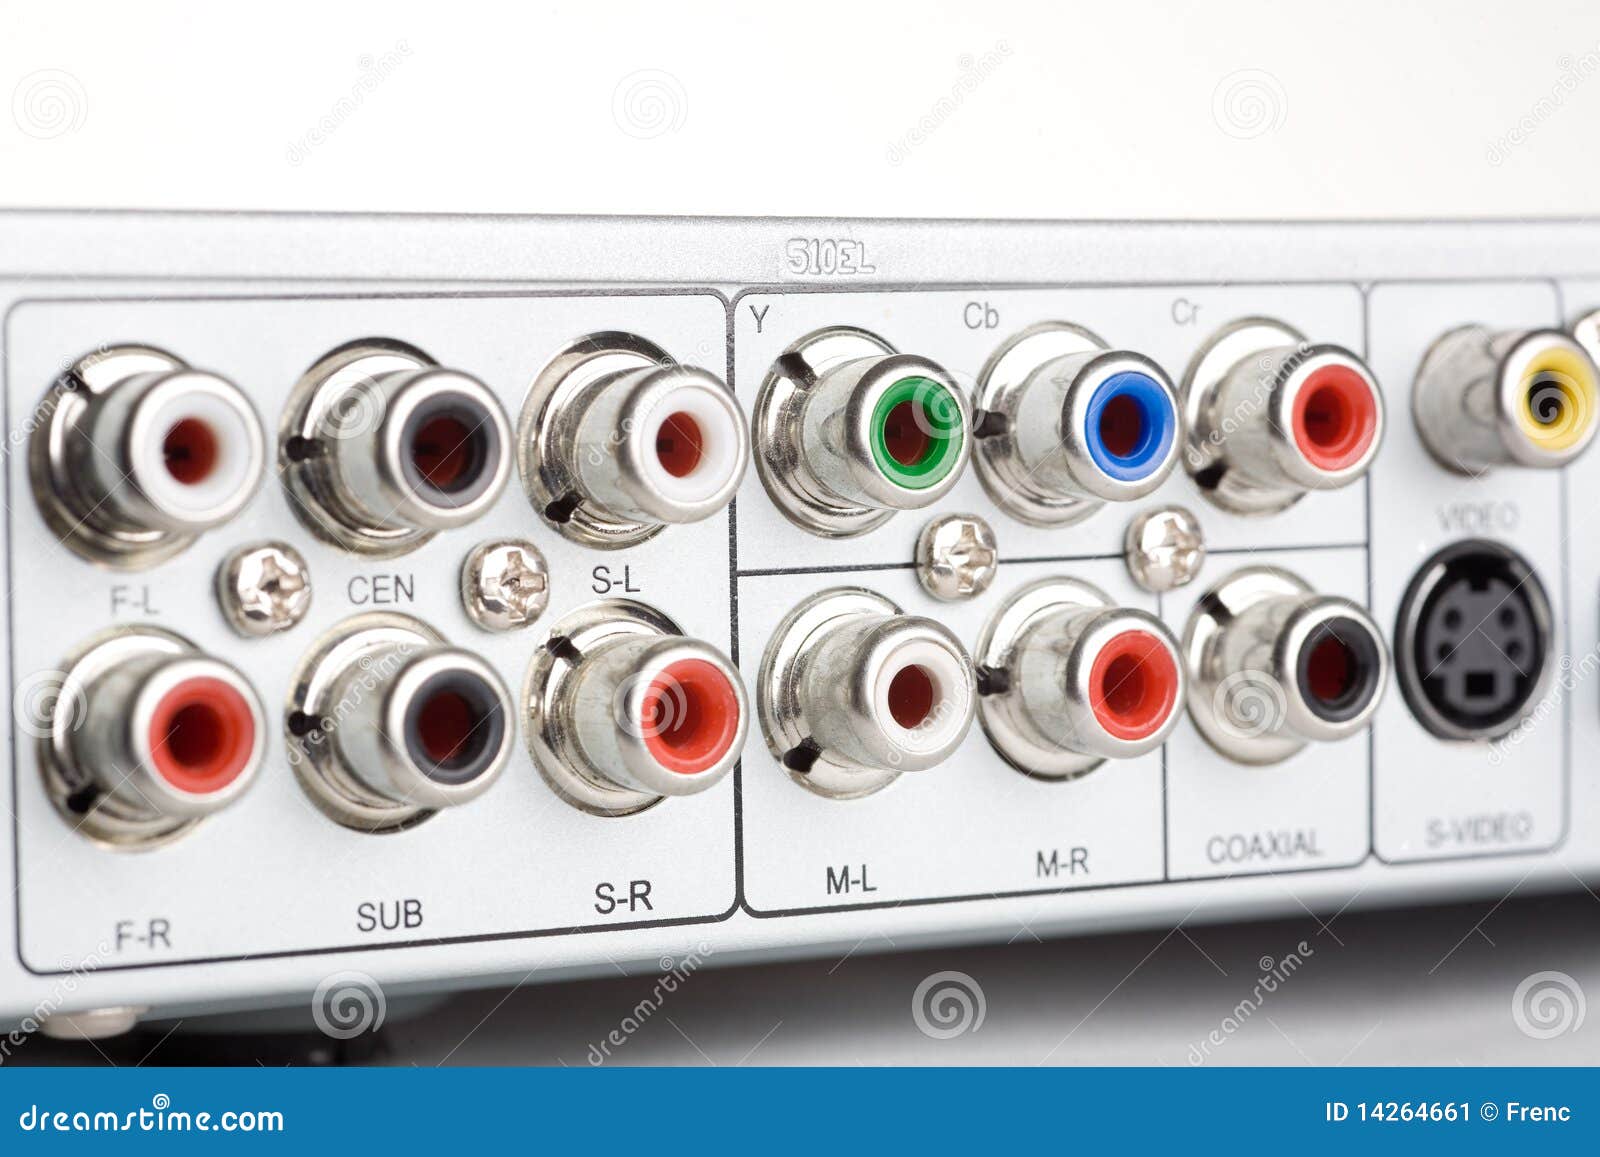 RCA Connections of a DVD Player Stock Image - Image of interface, shiny:  14264661